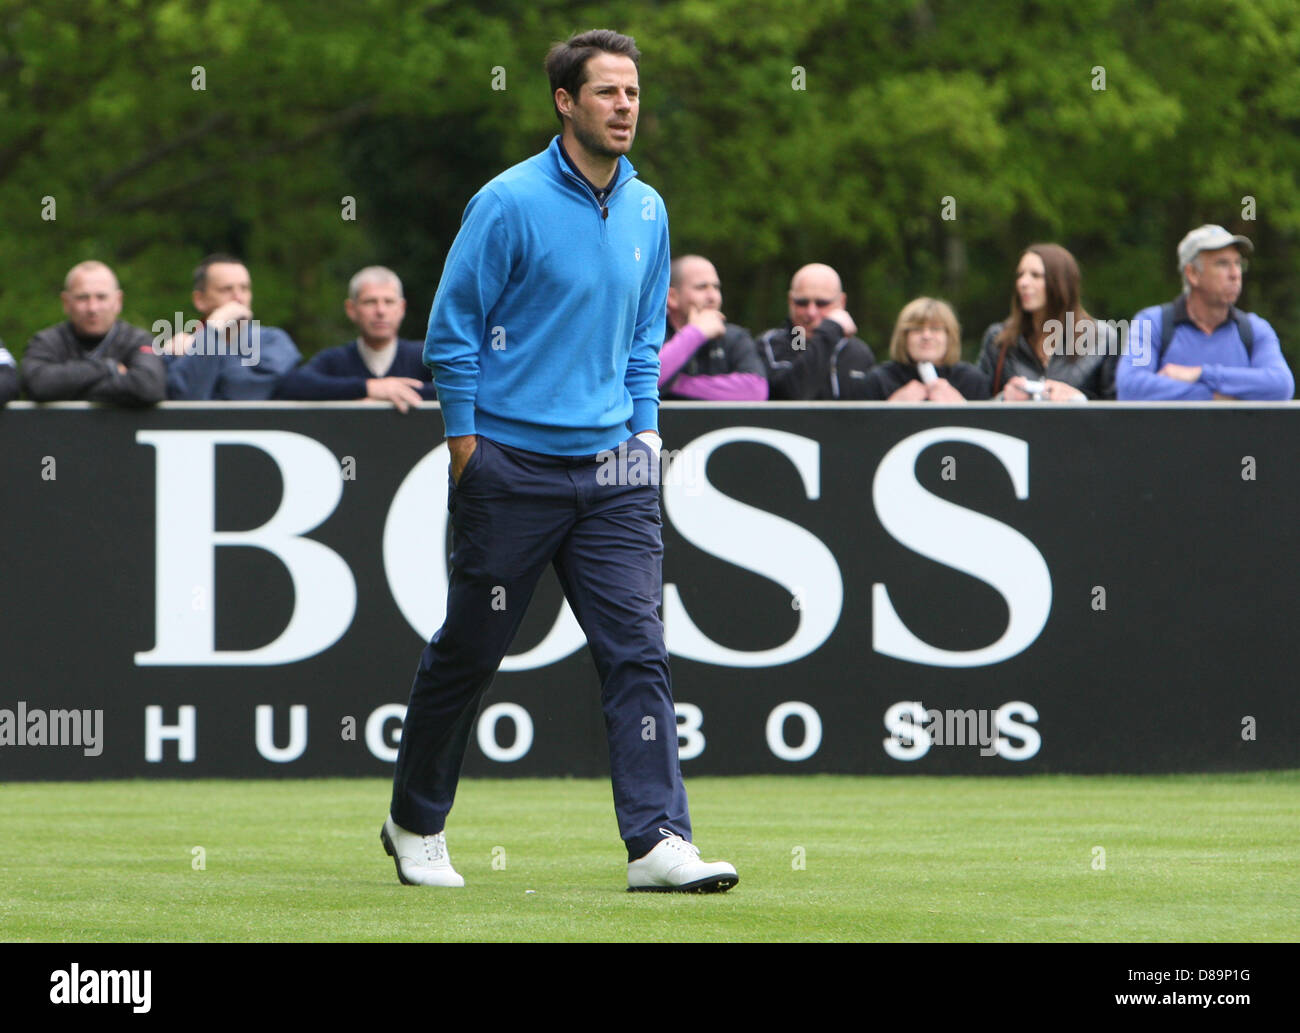 Wentworth, UK. 22nd May 2013.  Jamie Redknapp during the Celebrity Pro-Am competition from Wentworth Golf Club. Stock Photo